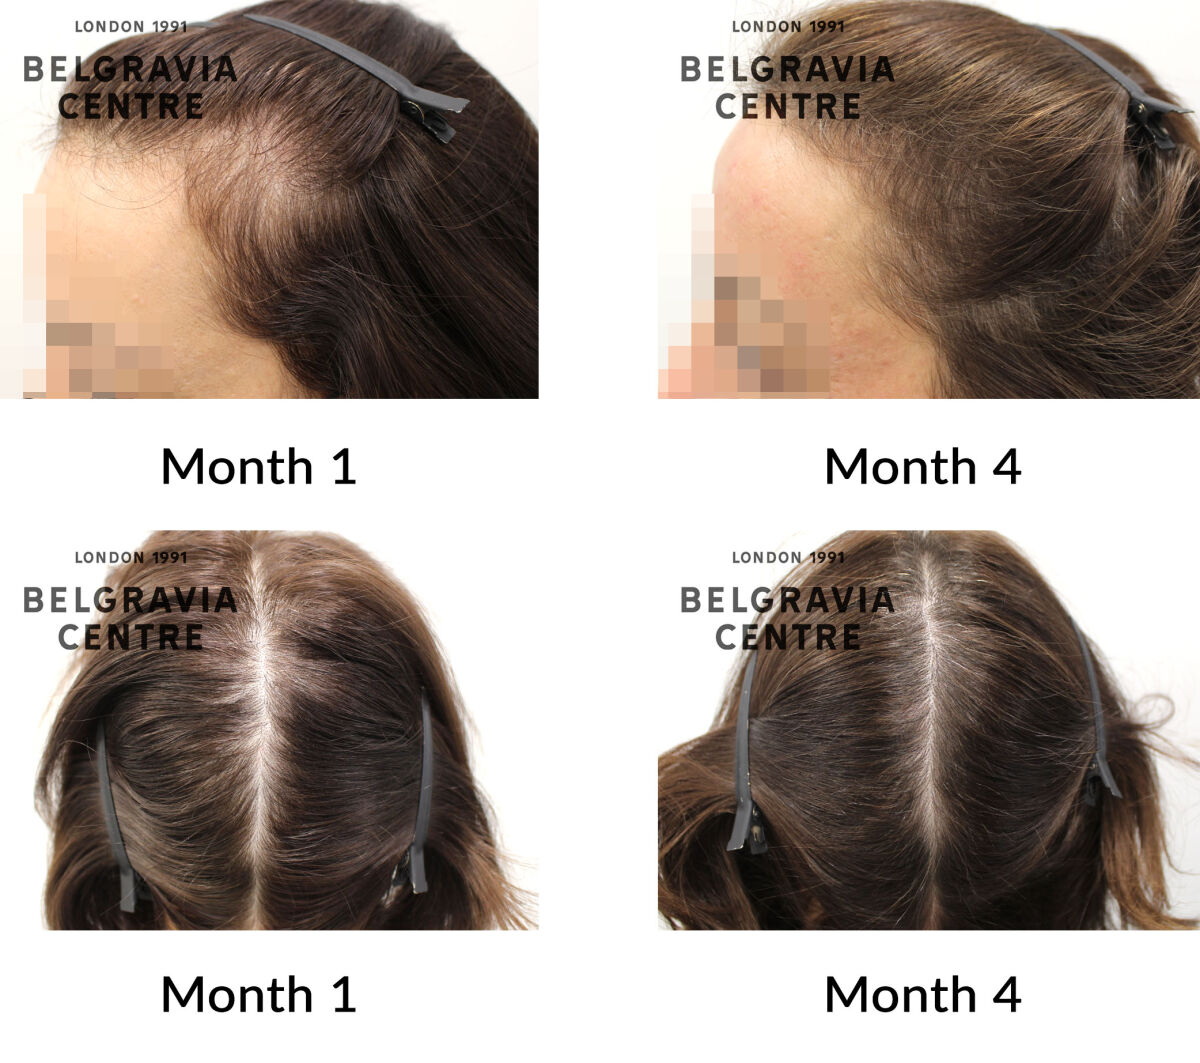 female pattern hair loss and diffuse thinning the belgravia centre 331267